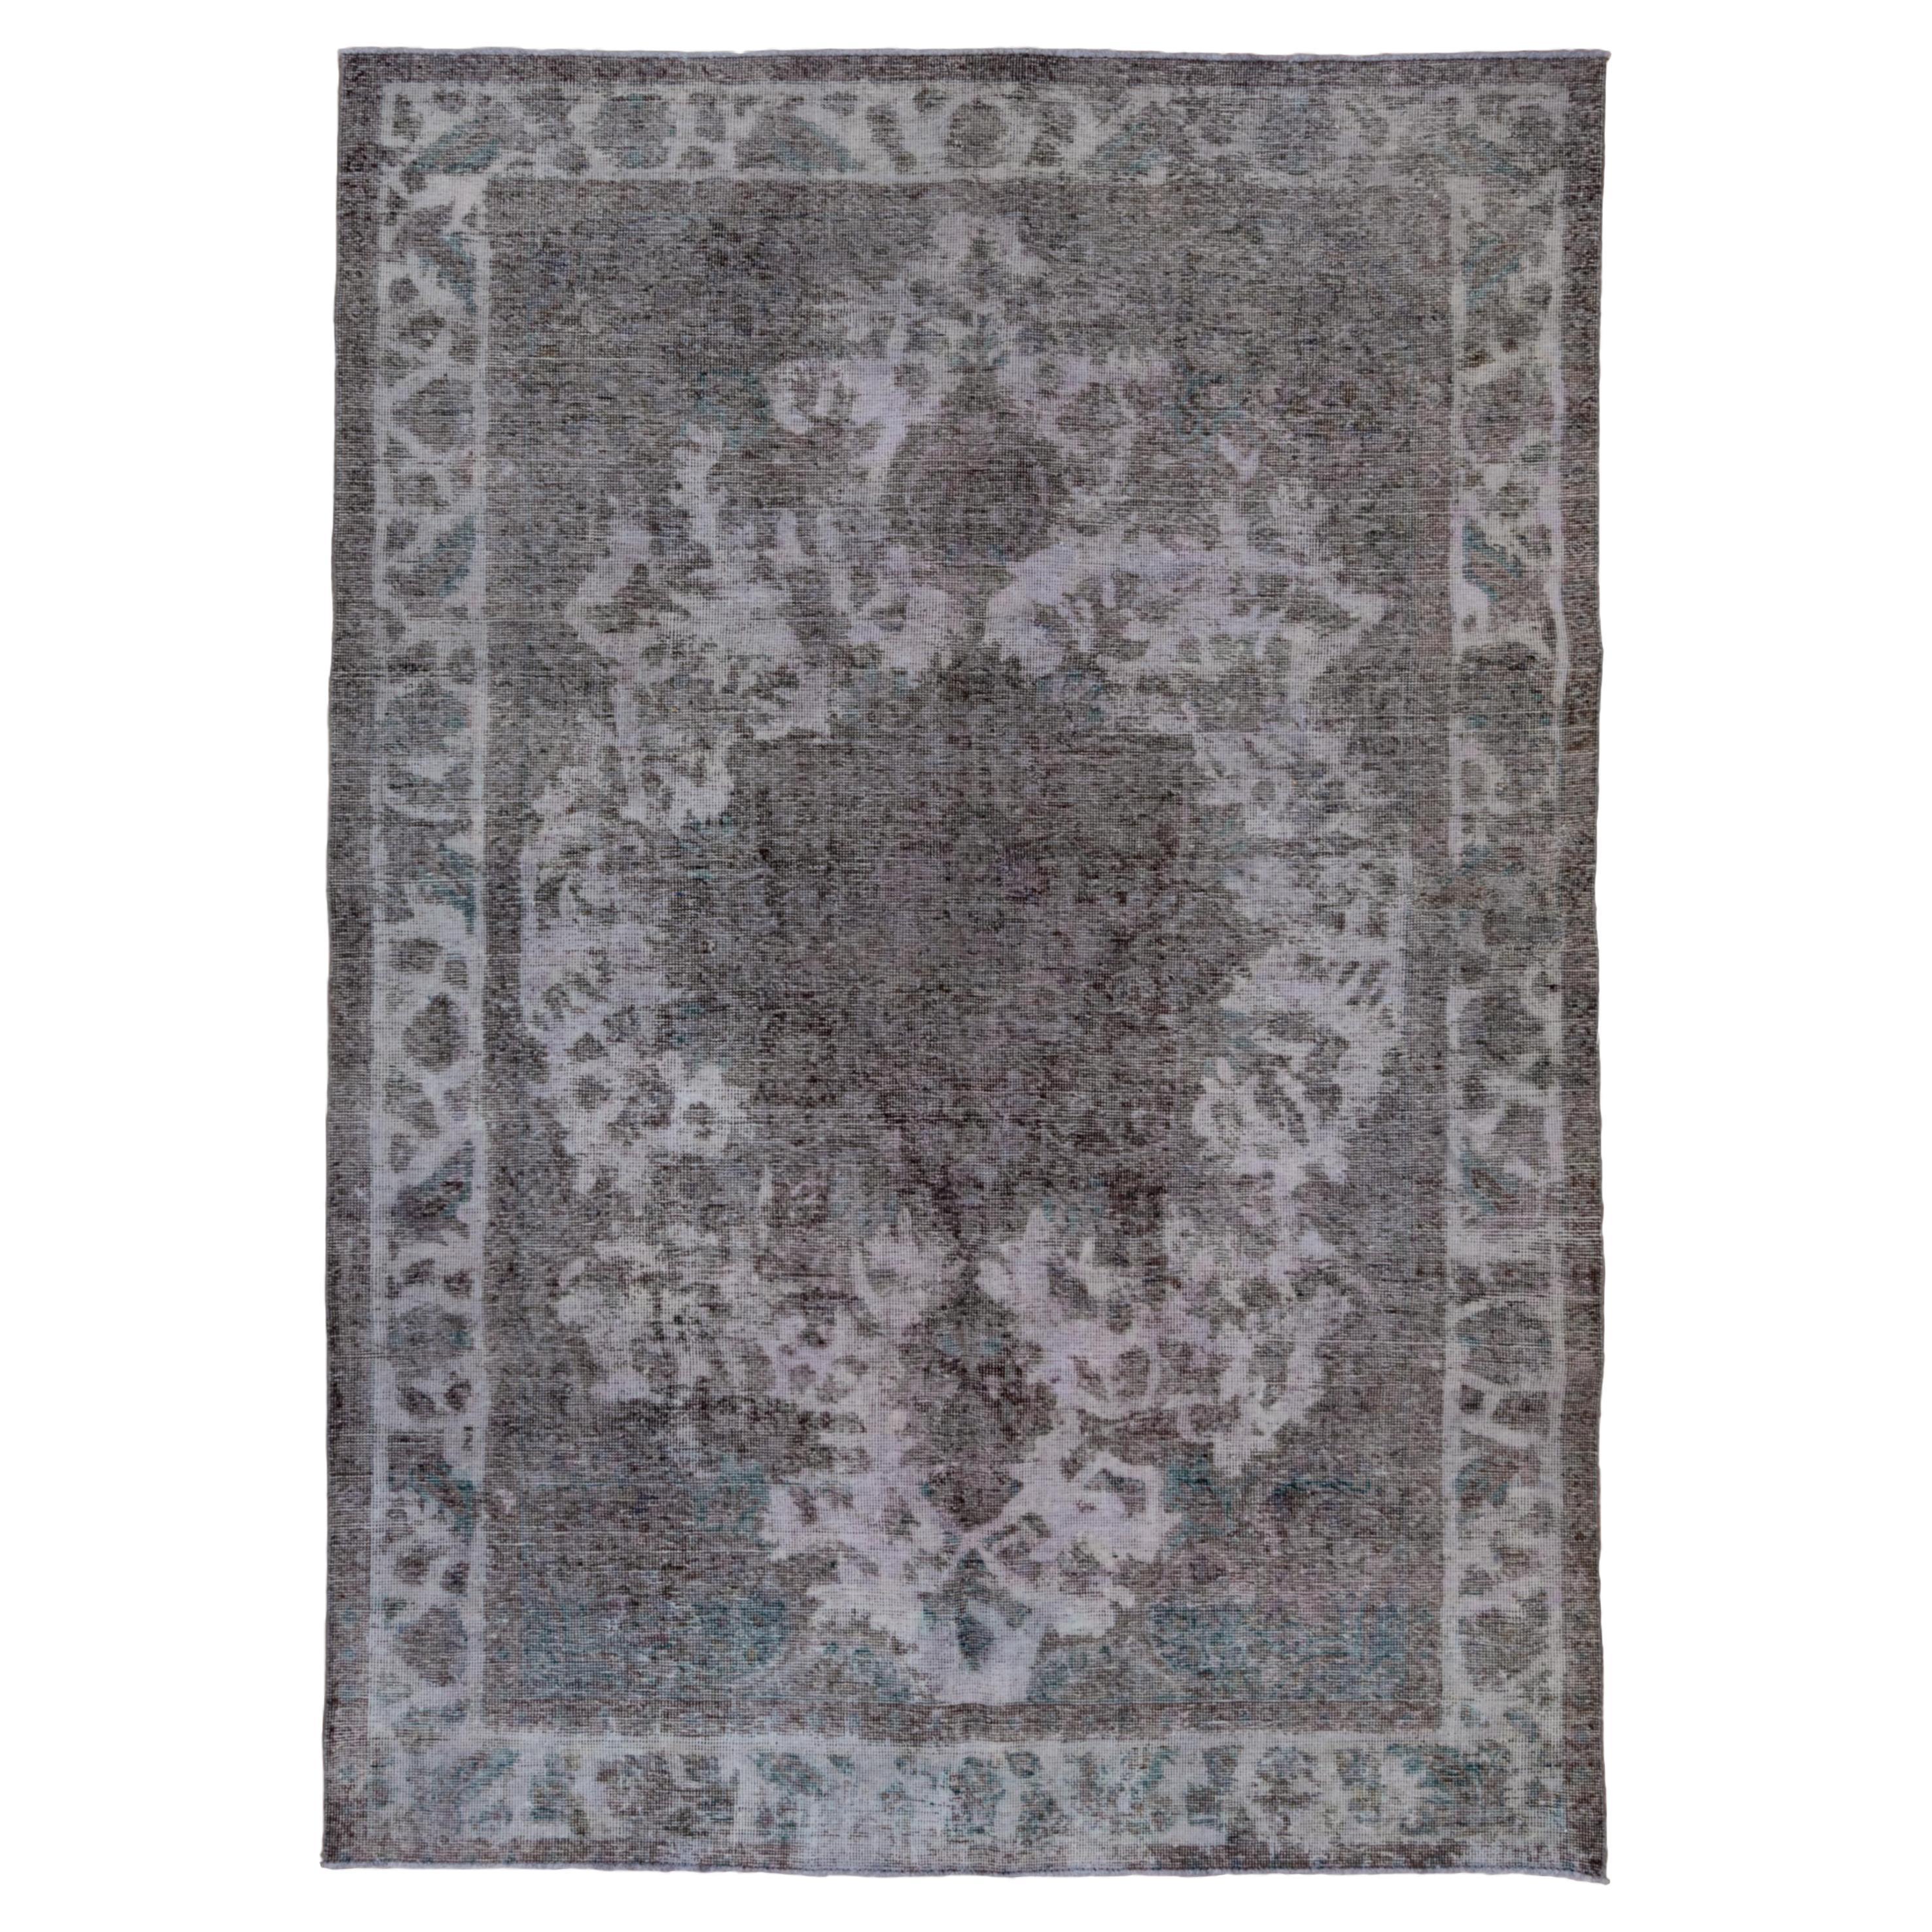 Turkish Central Medallion Shabby Chic For Sale